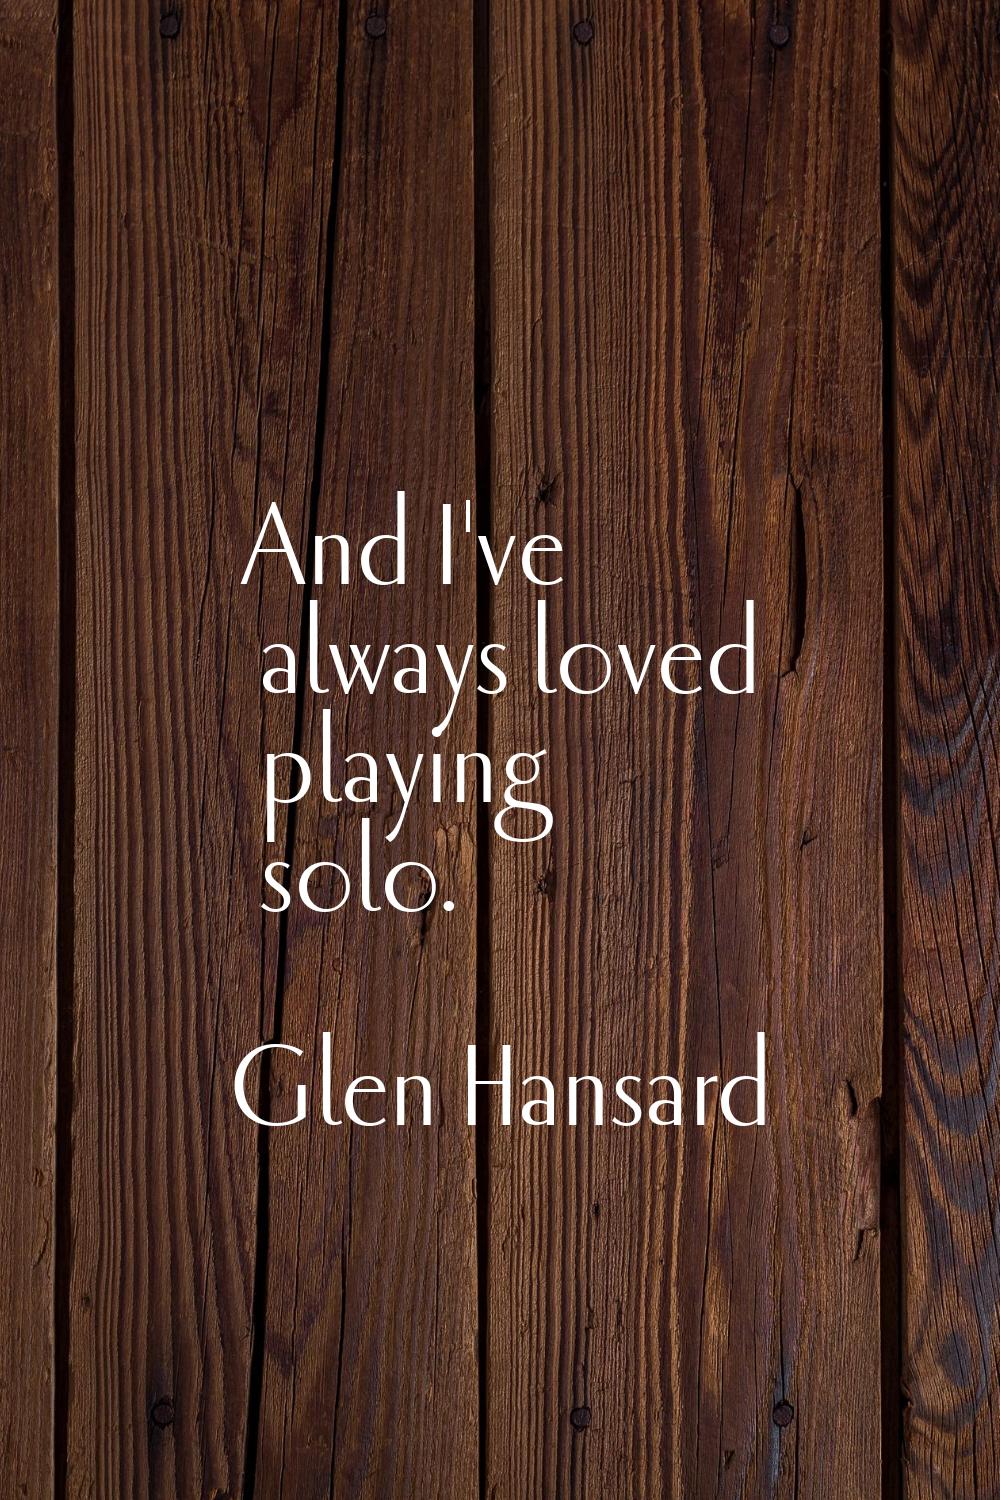 And I've always loved playing solo.